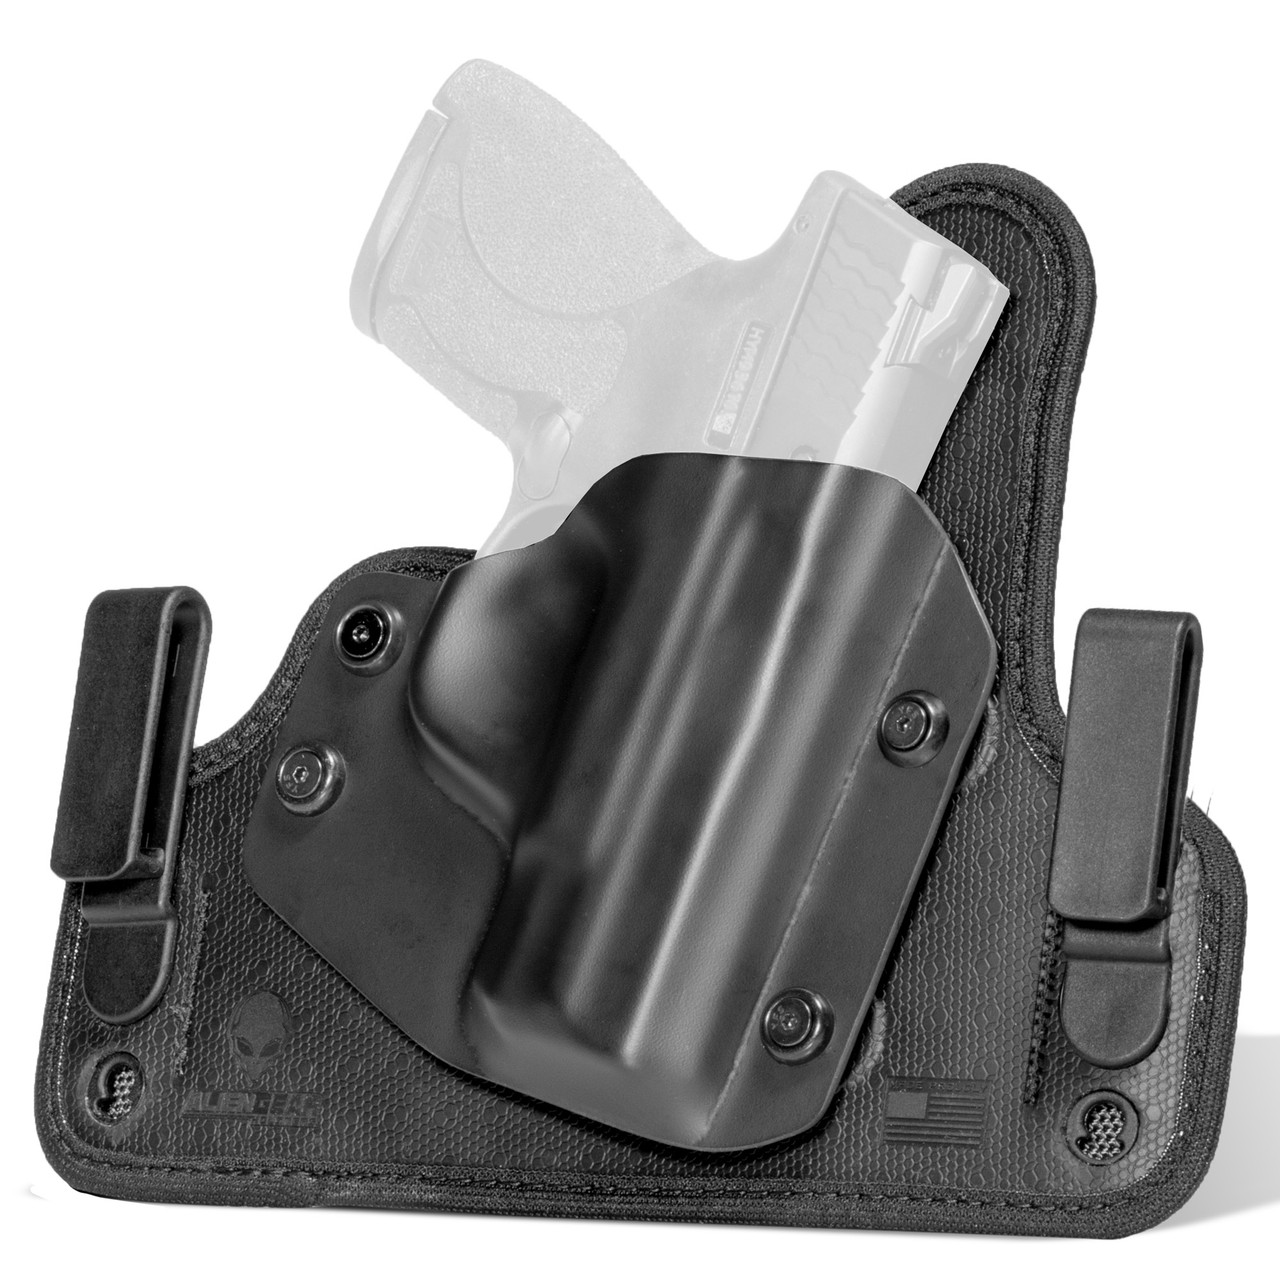 Standard Toolless Holster Clips by Alien Gear Holsters